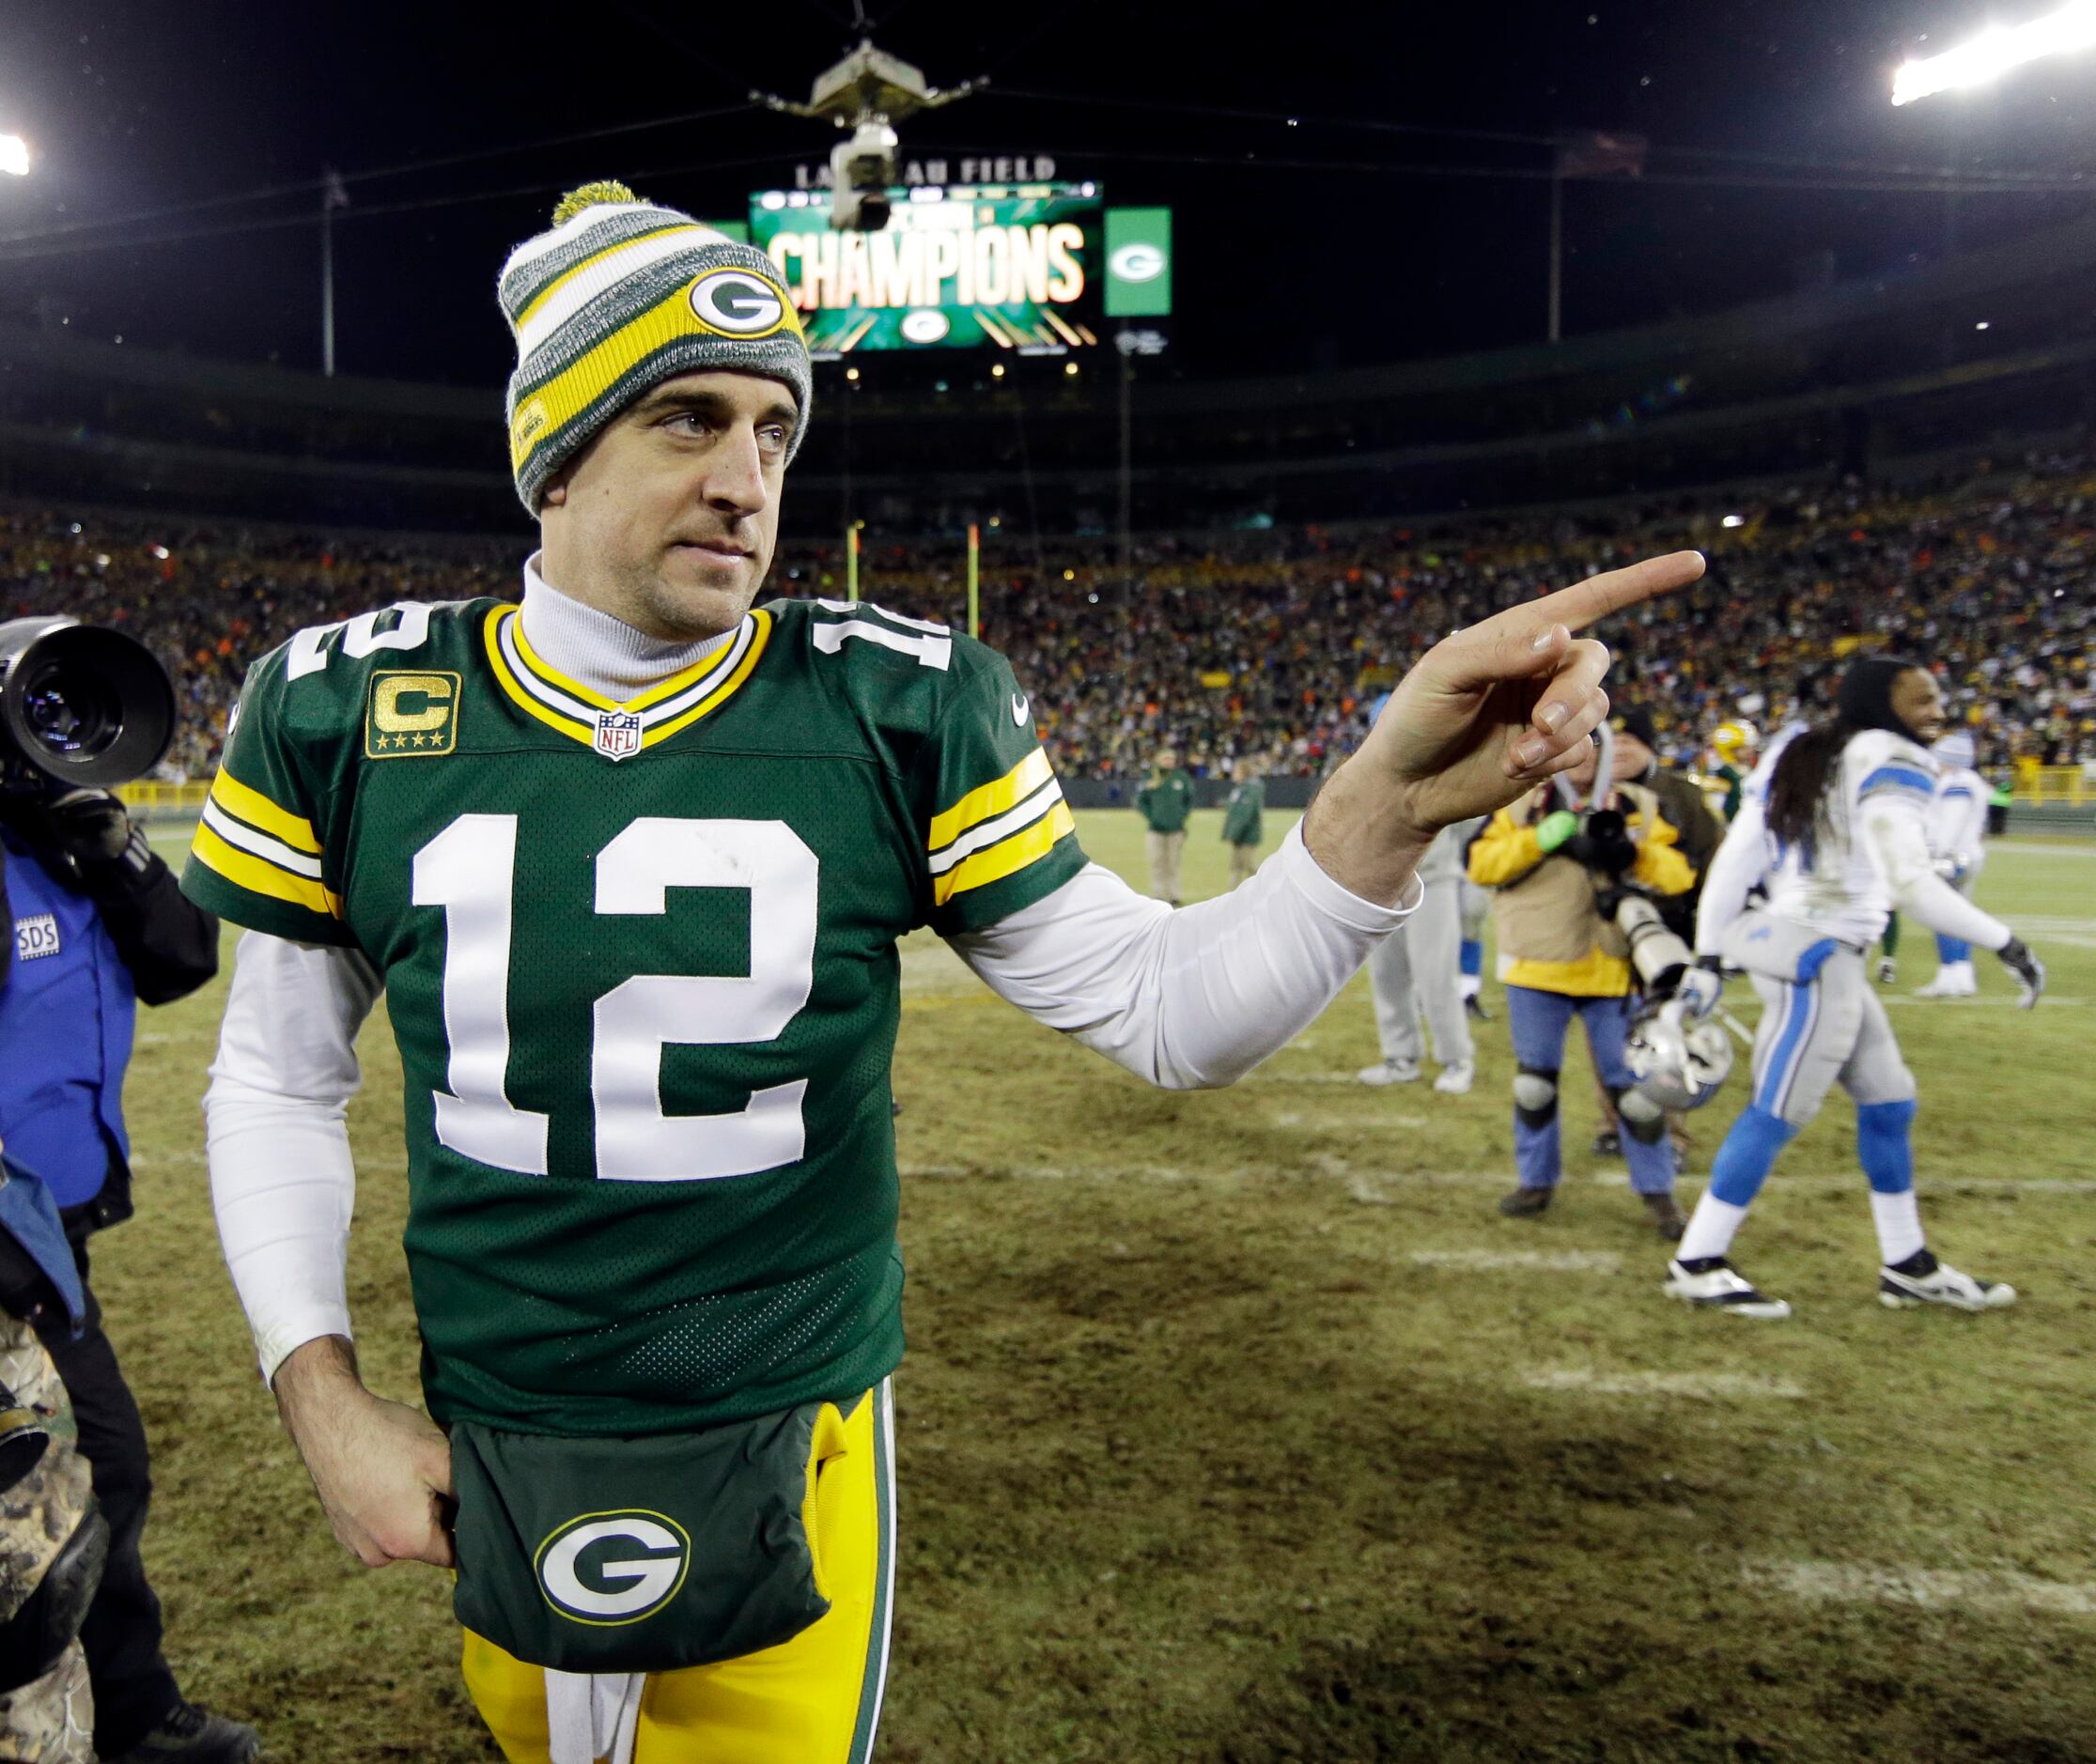 Live Blog: Packers-Cowboys